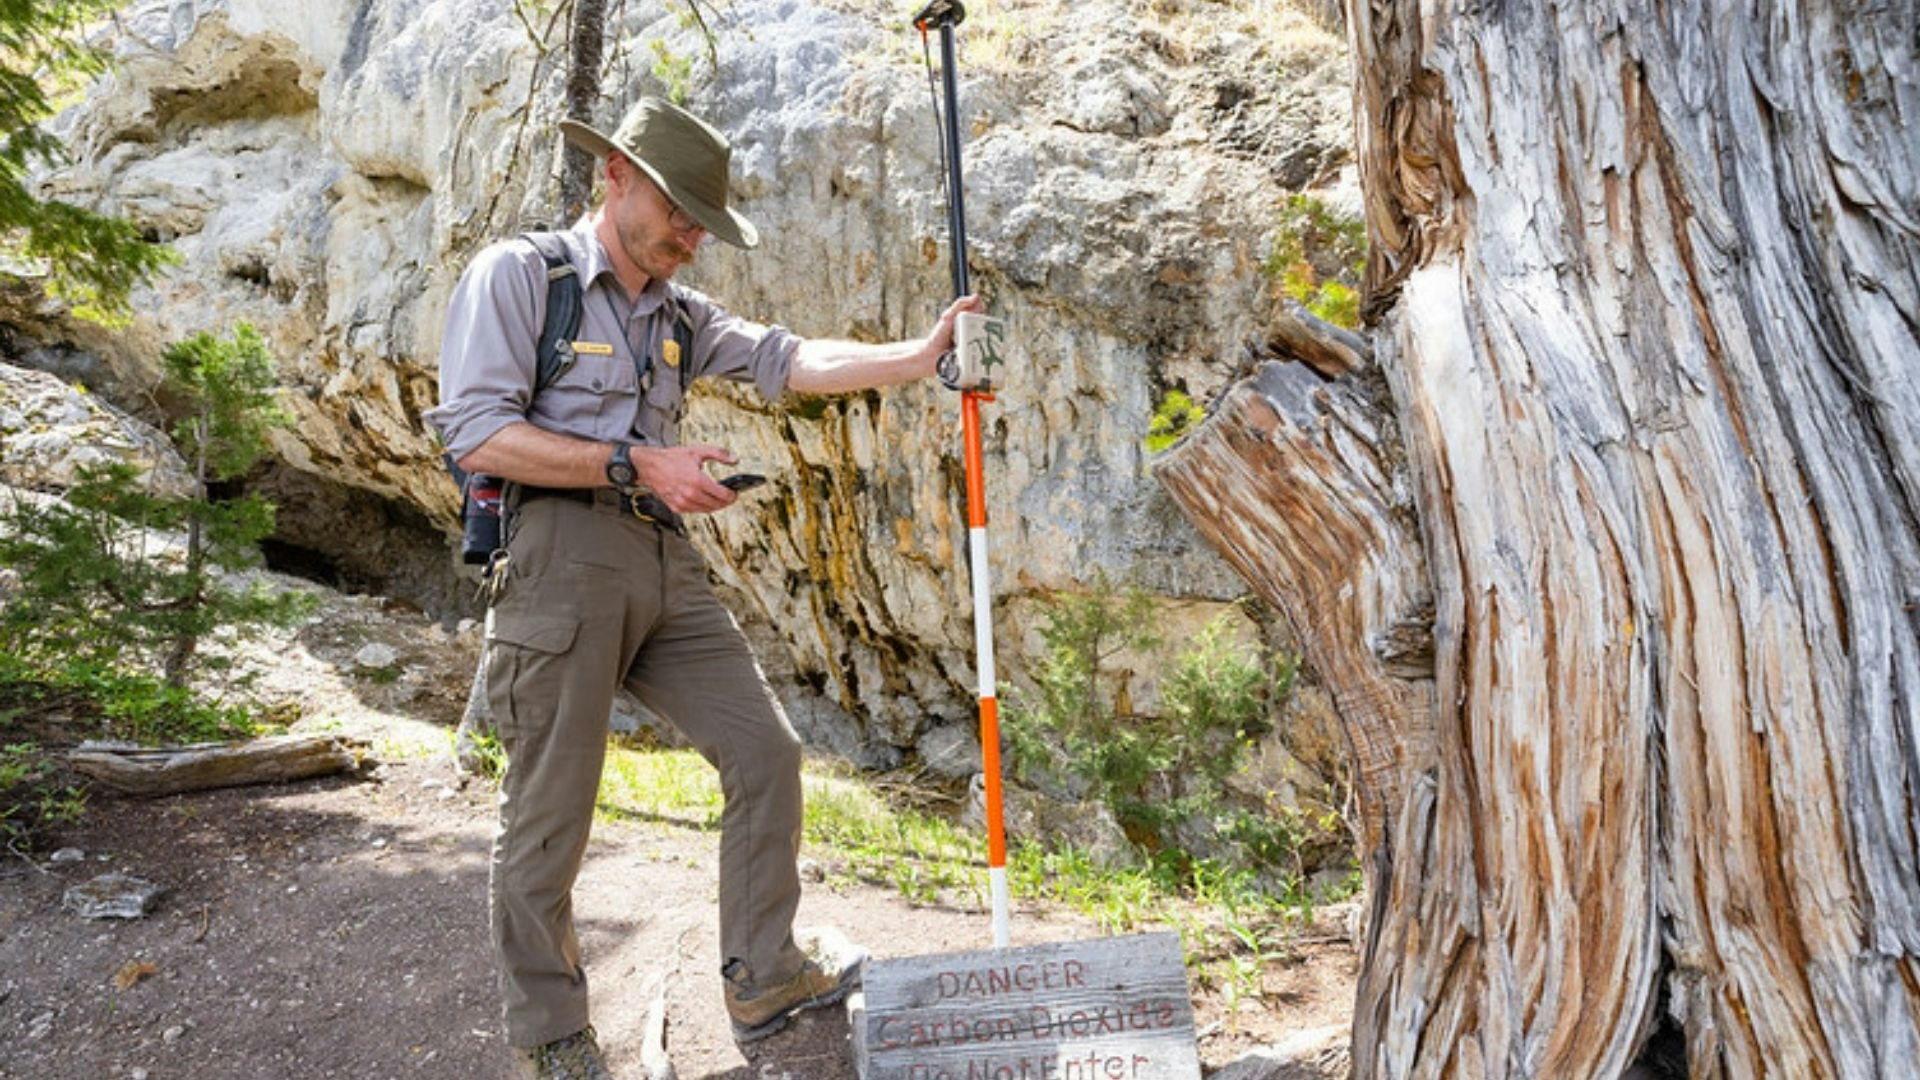 Ranger Alex Zaideman works in Yellowstone. Like other industries around the U.S., the national park is having trouble finding enough workers to fill open jobs at Yellowstone.